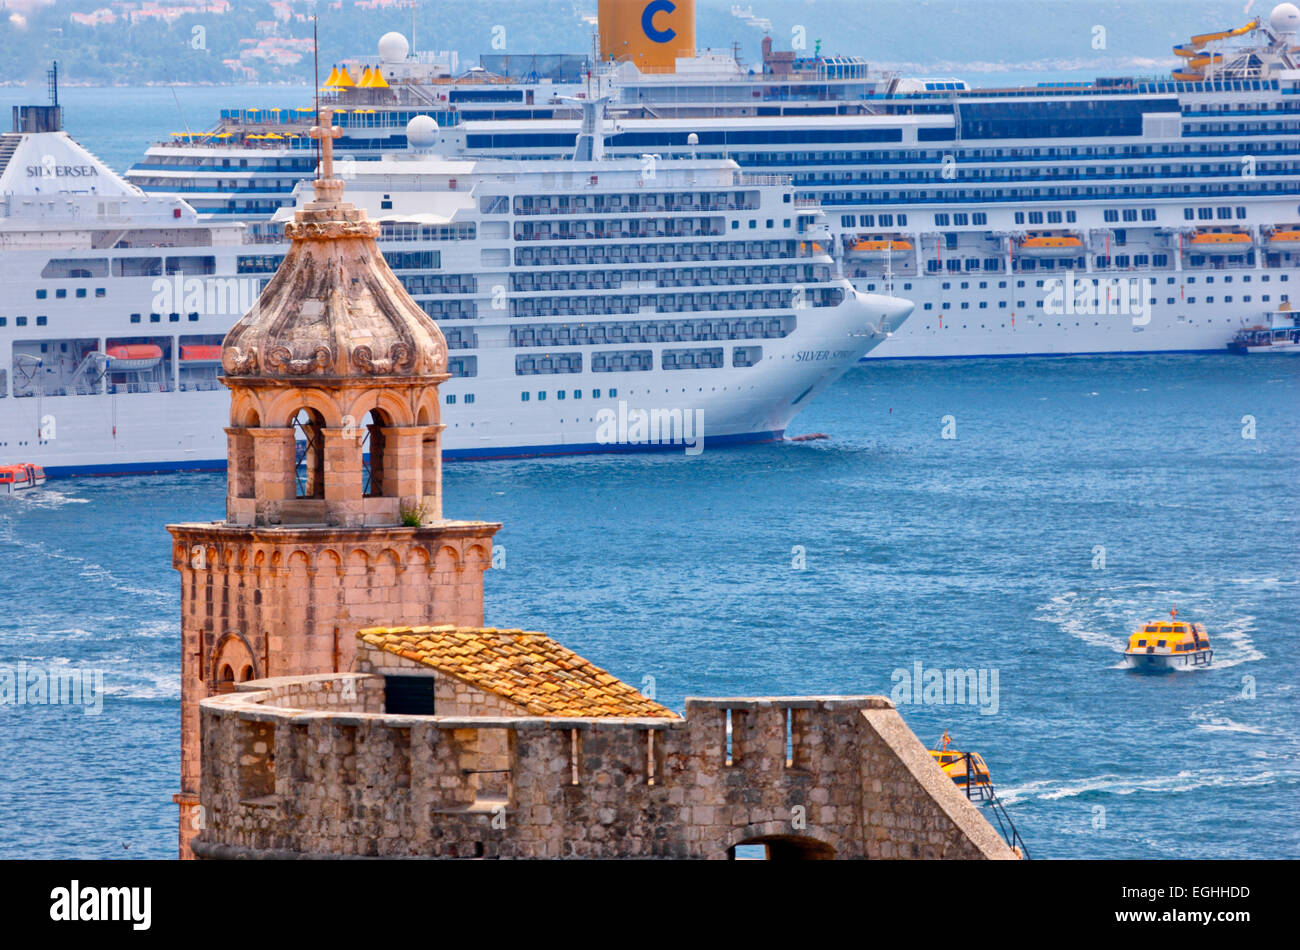 Cruise ships docked near the old part of Dubrovnik, Crotia Stock Photo